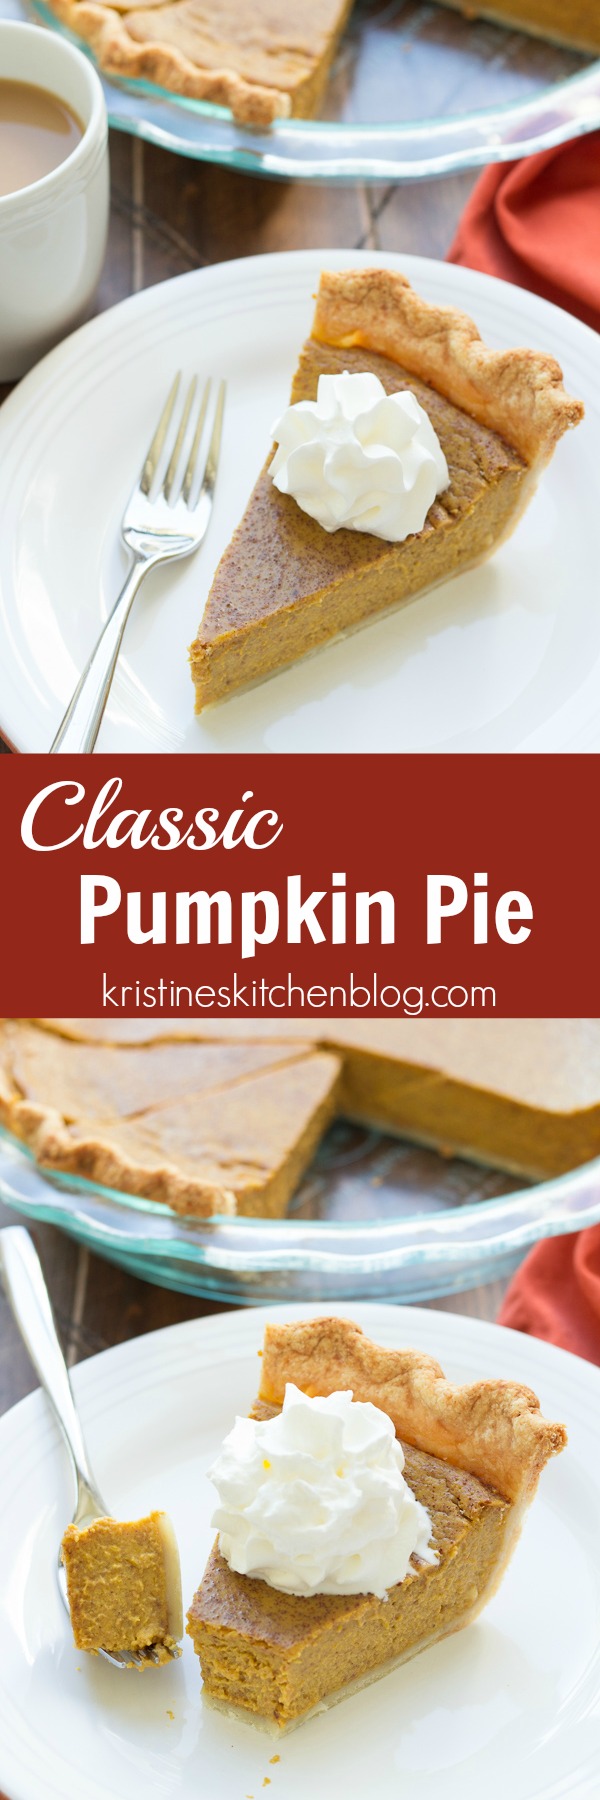 This is THE recipe for Classic Pumpkin Pie. 30 minutes prep, easy no-chill pie crust, and lots of pumpkin and spice flavors! The perfect pie for your Thanksgiving or holiday meal!